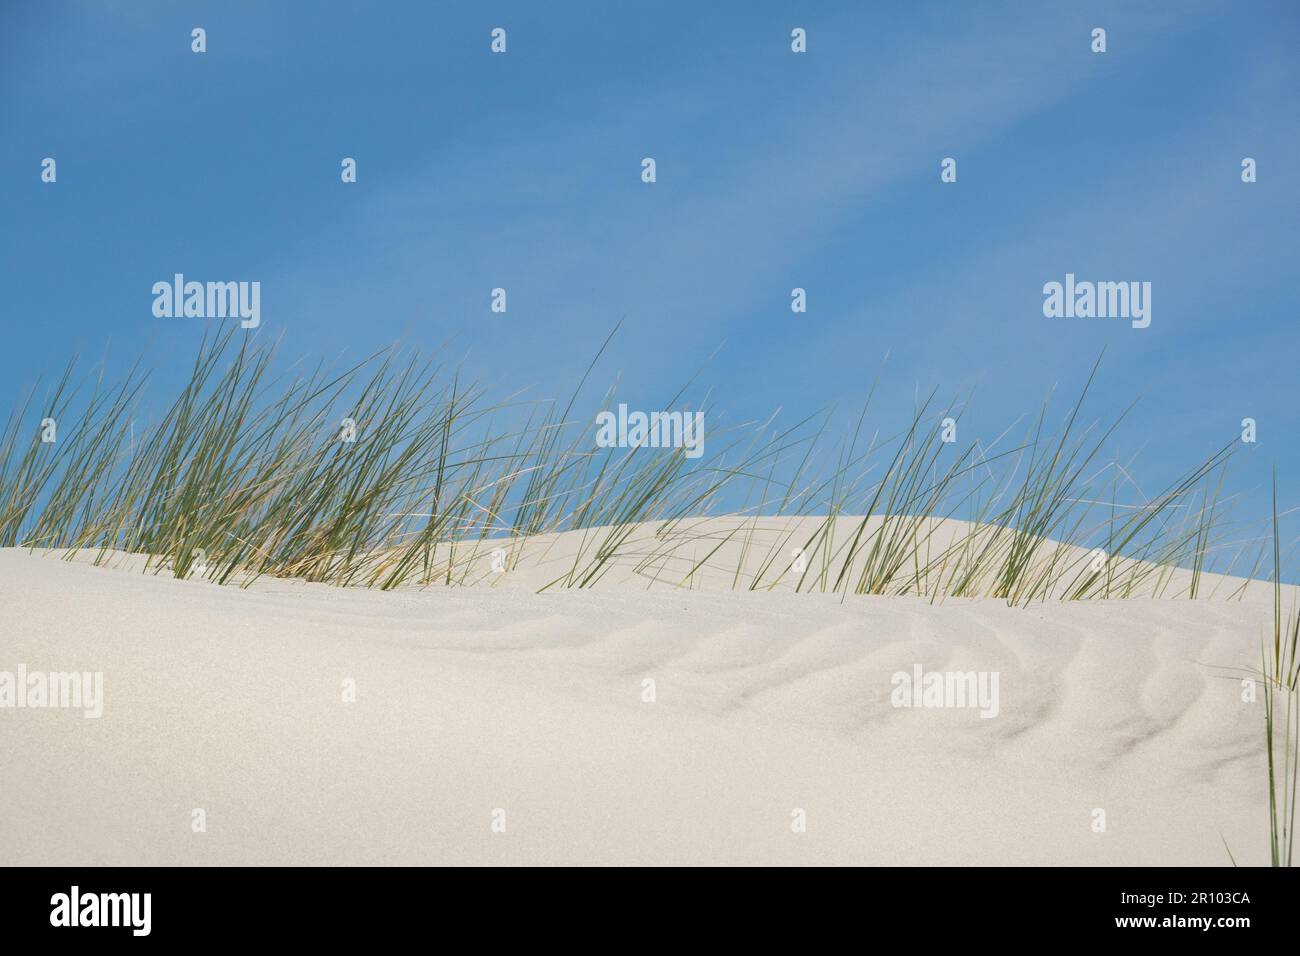 Marram grass buried by wind under dune sand, blades of grass protrude just above and capture drifting sand. Stock Photo